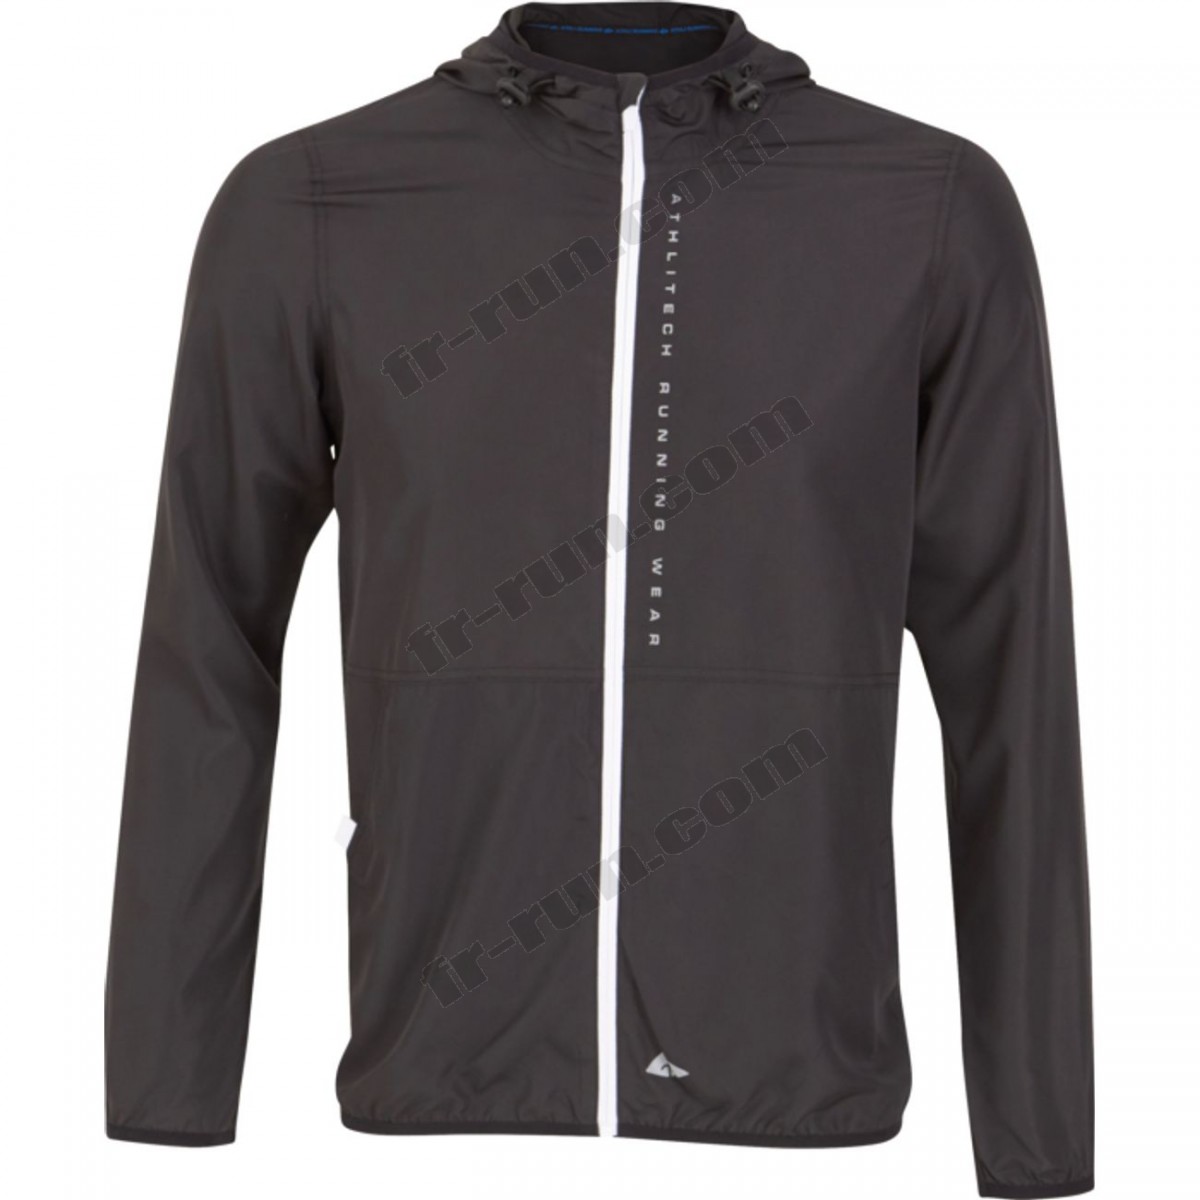 Athlitech/COUPE VENT running homme ATHLITECH CEDRIC CPV ◇◇◇ Pas Cher Du Tout - Athlitech/COUPE VENT running homme ATHLITECH CEDRIC CPV ◇◇◇ Pas Cher Du Tout